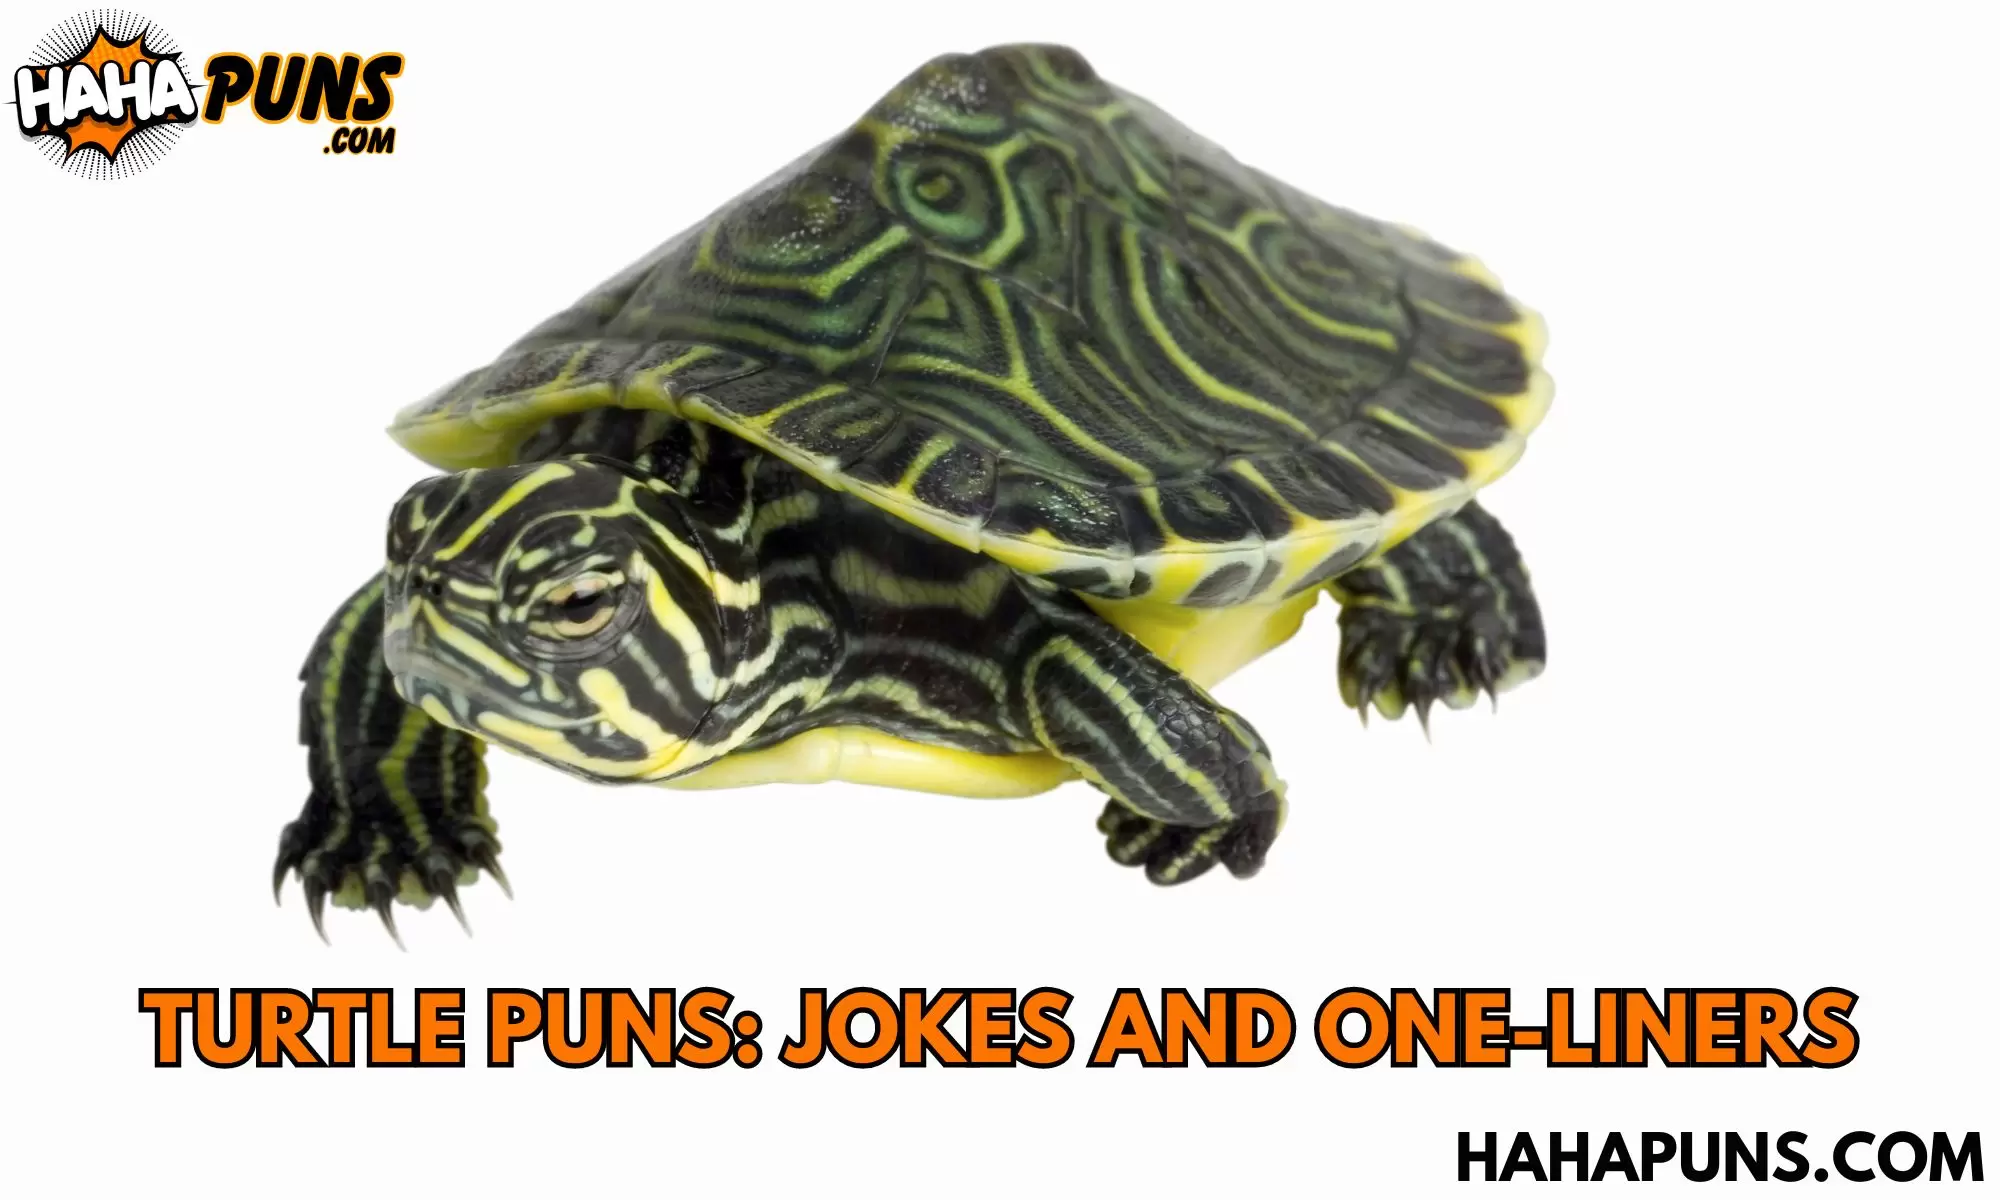 Turtle Puns: Jokes And One-Liners